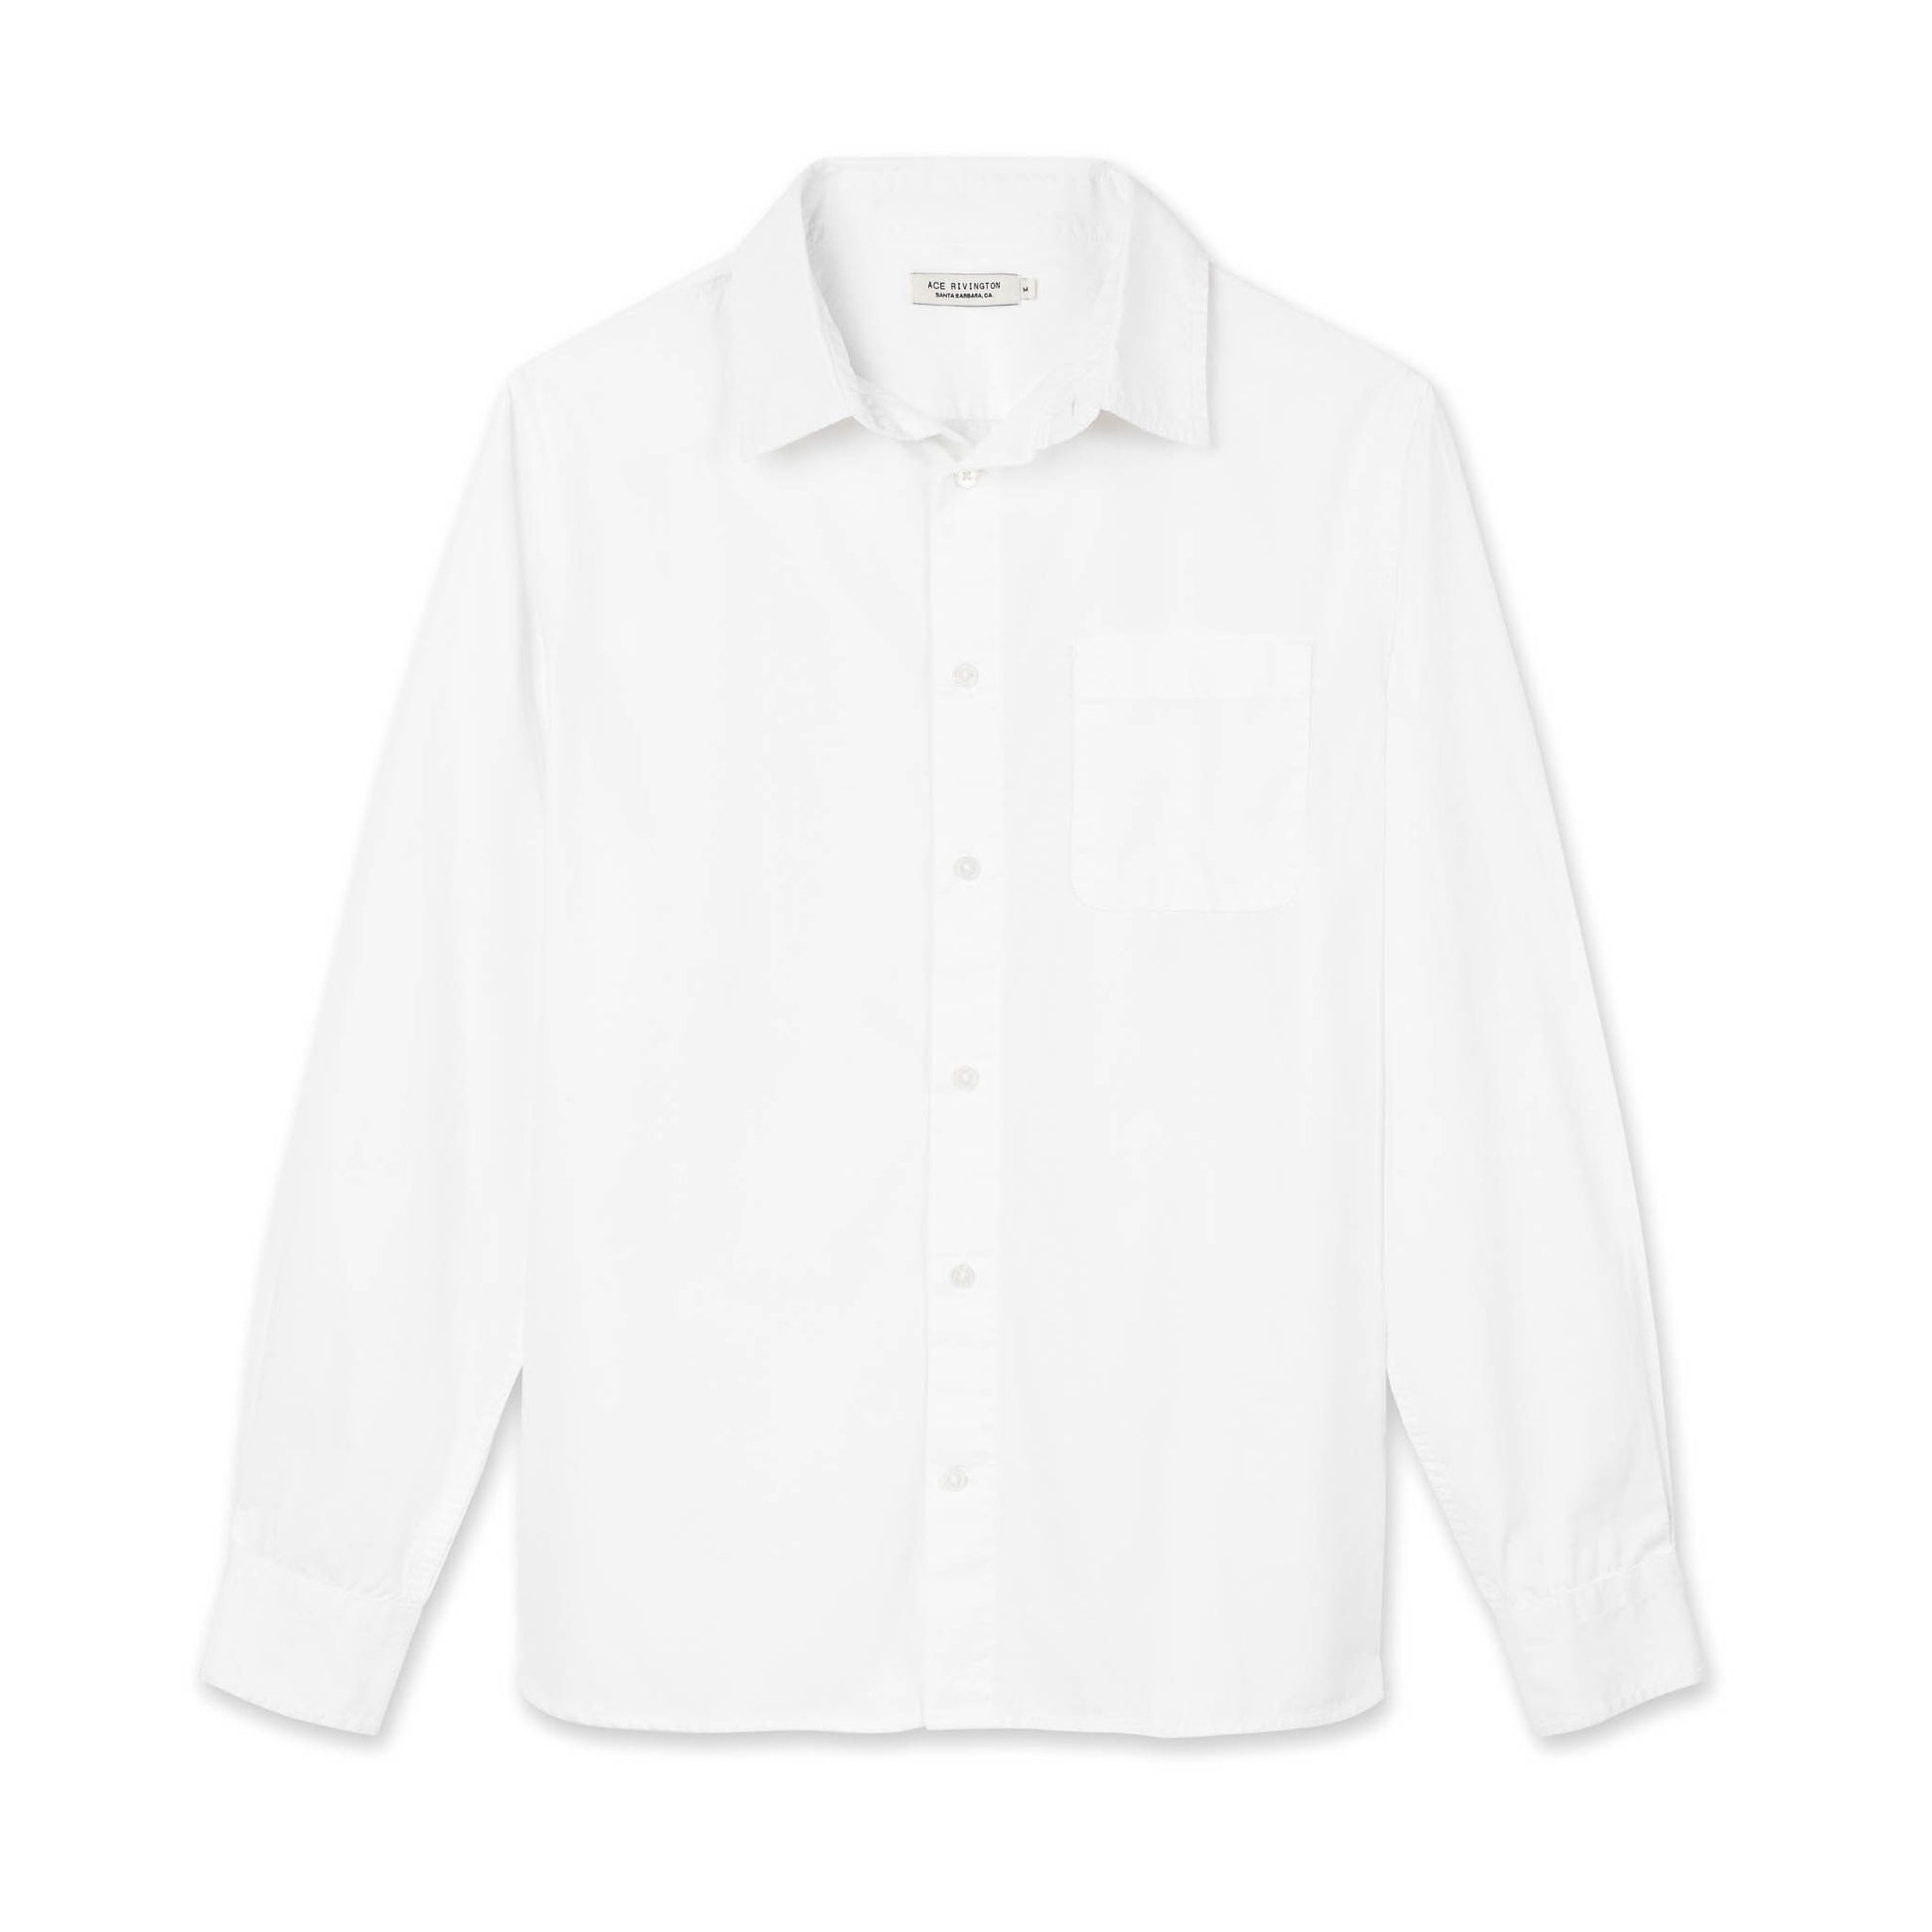 front of men's white long sleeve tailored poplin shirt with color matched buttons and a single pocket in shorter-hem height option